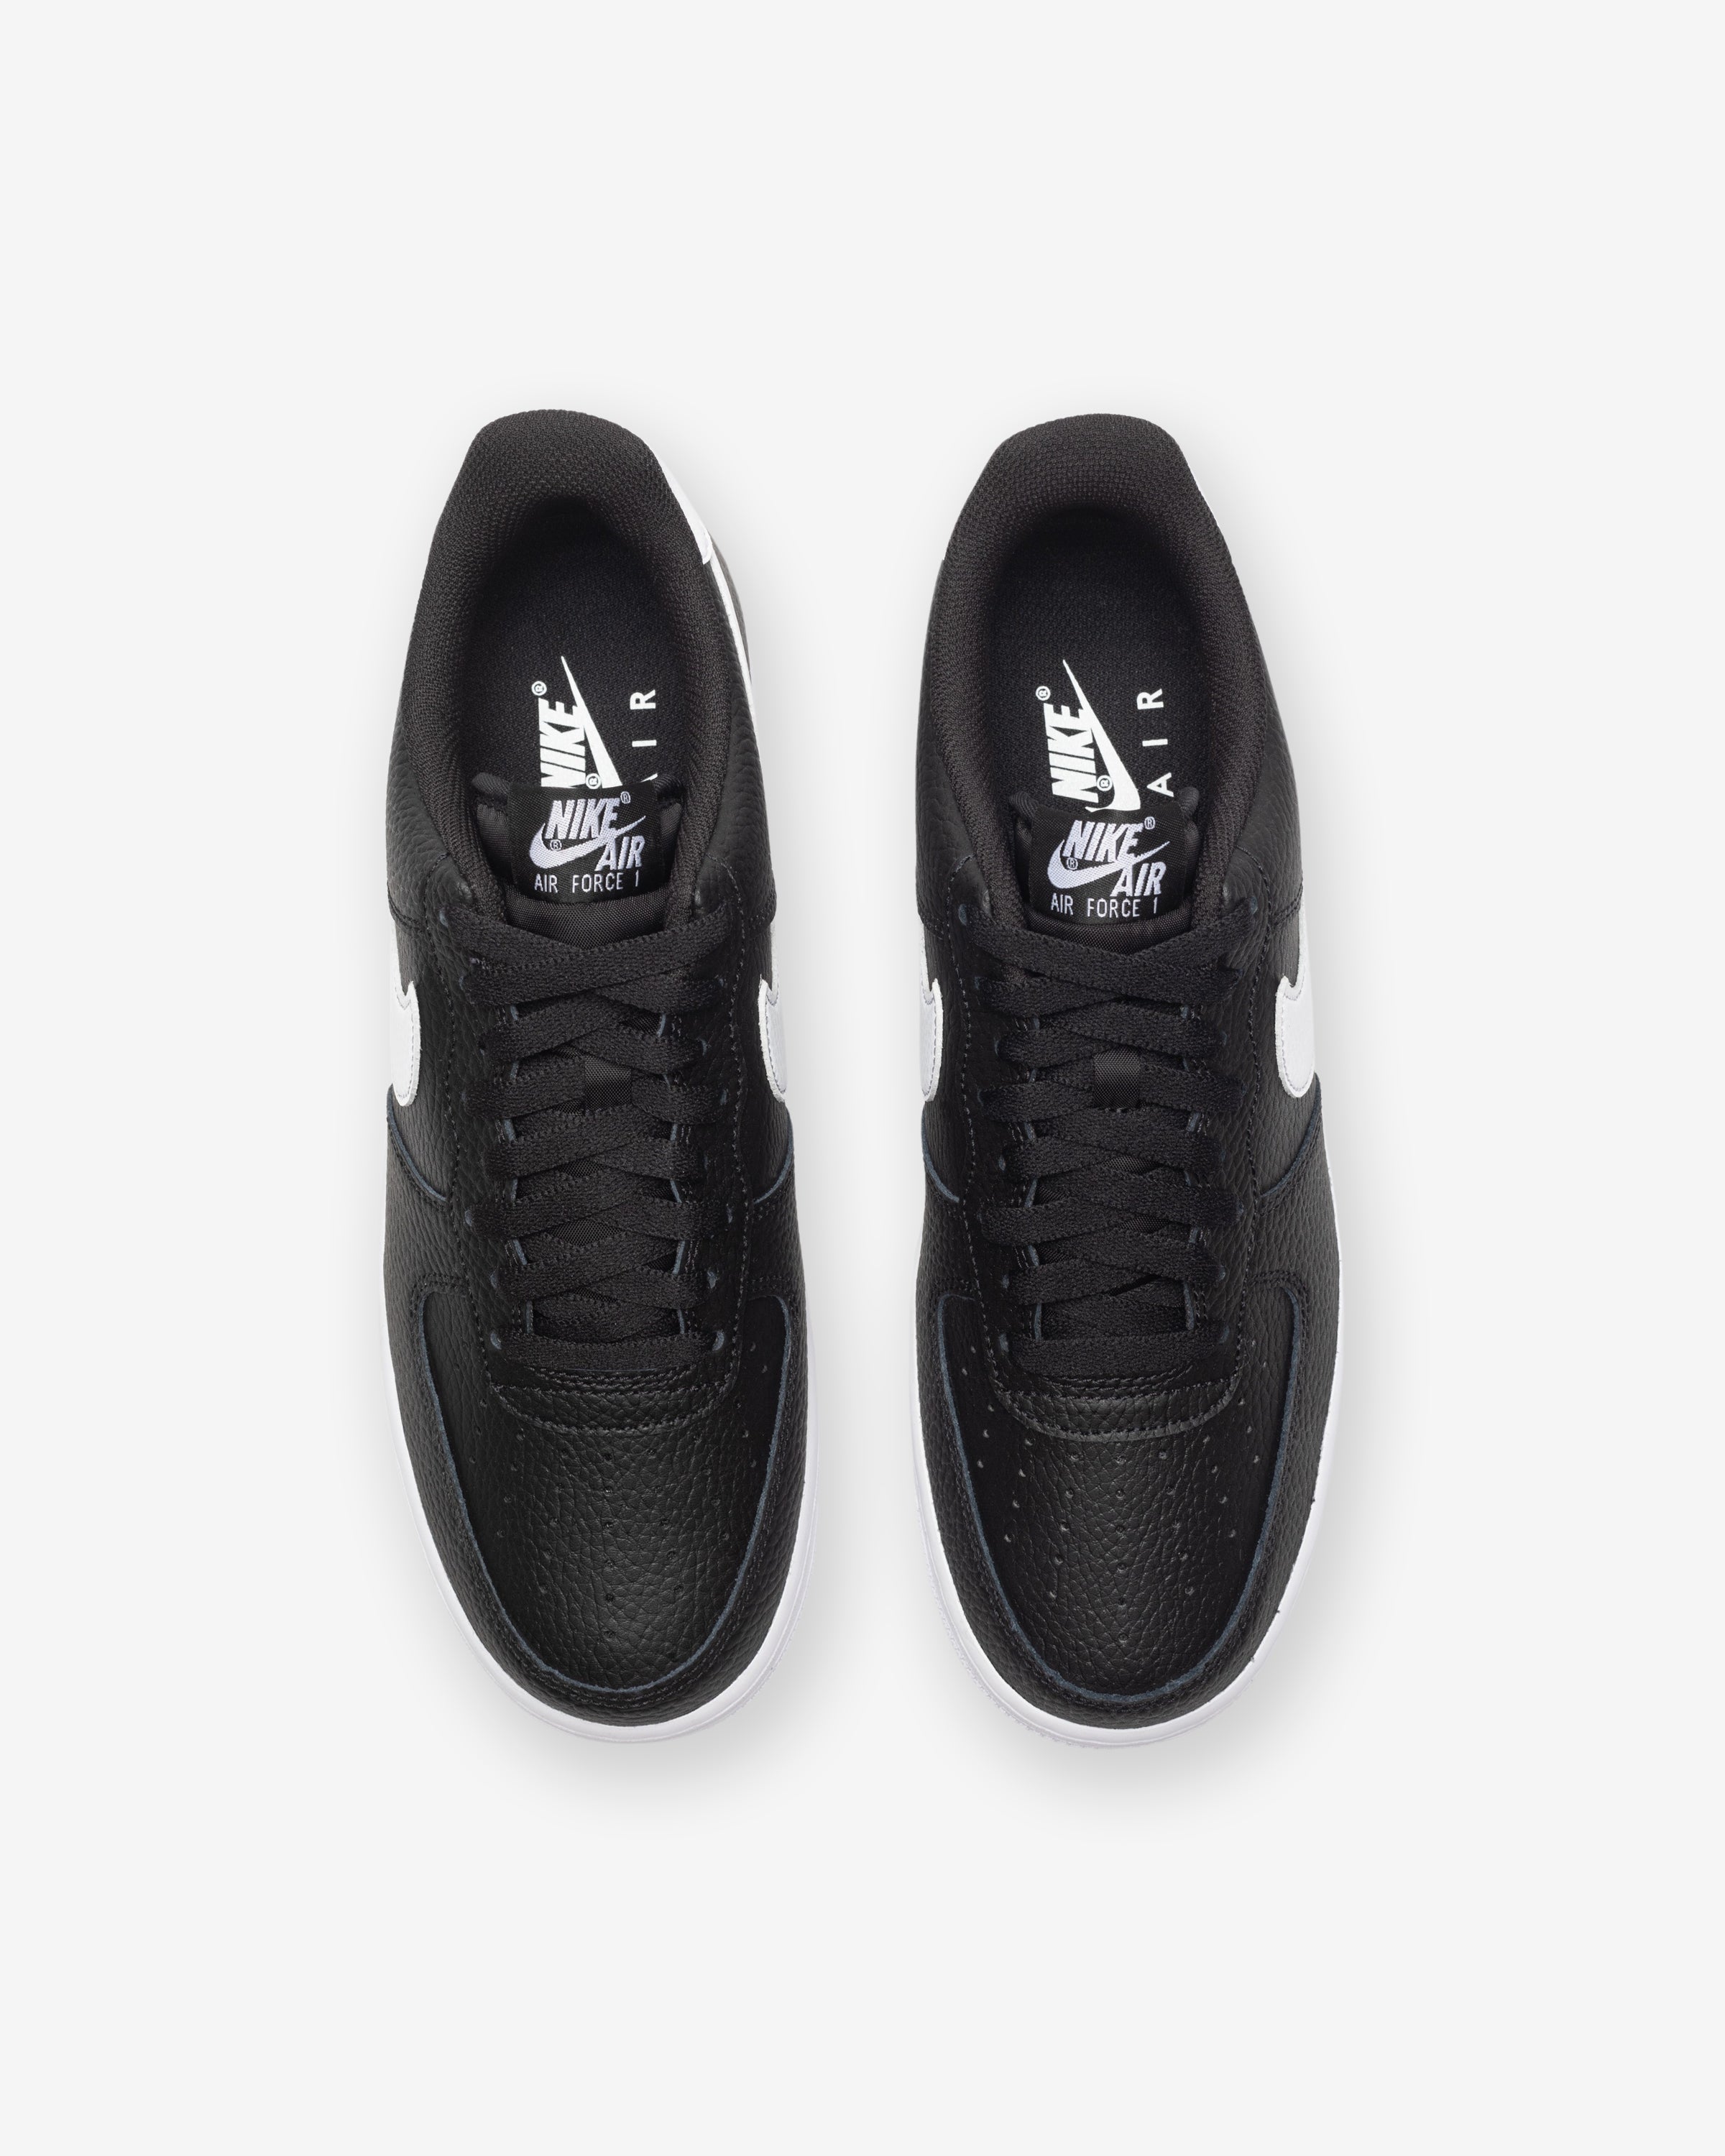 NIKE AIR FORCE 1 '07 - BLACK/ WHITE – Undefeated